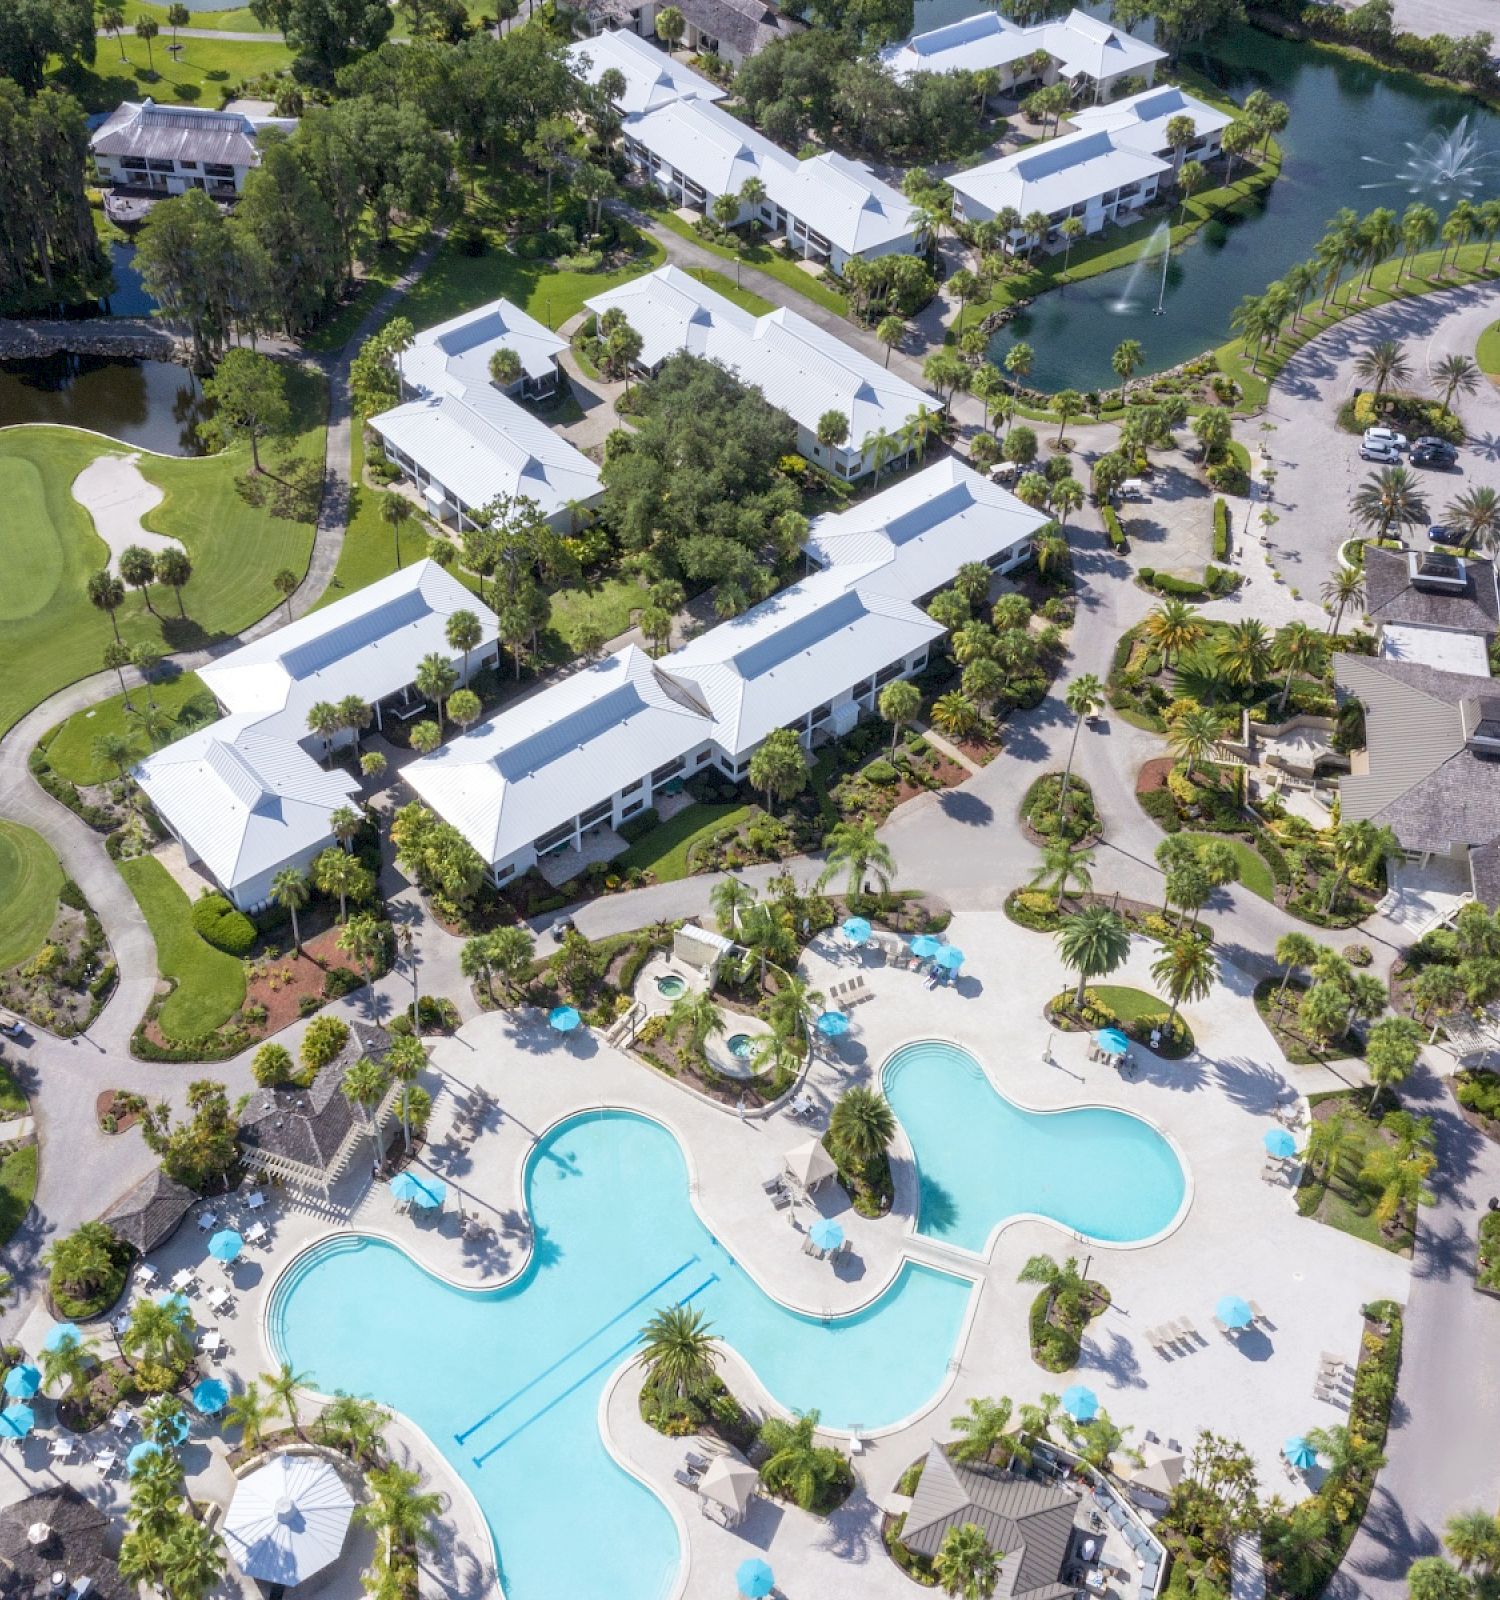 Aerial view of a resort with swimming pools, golf courses, and lakes.